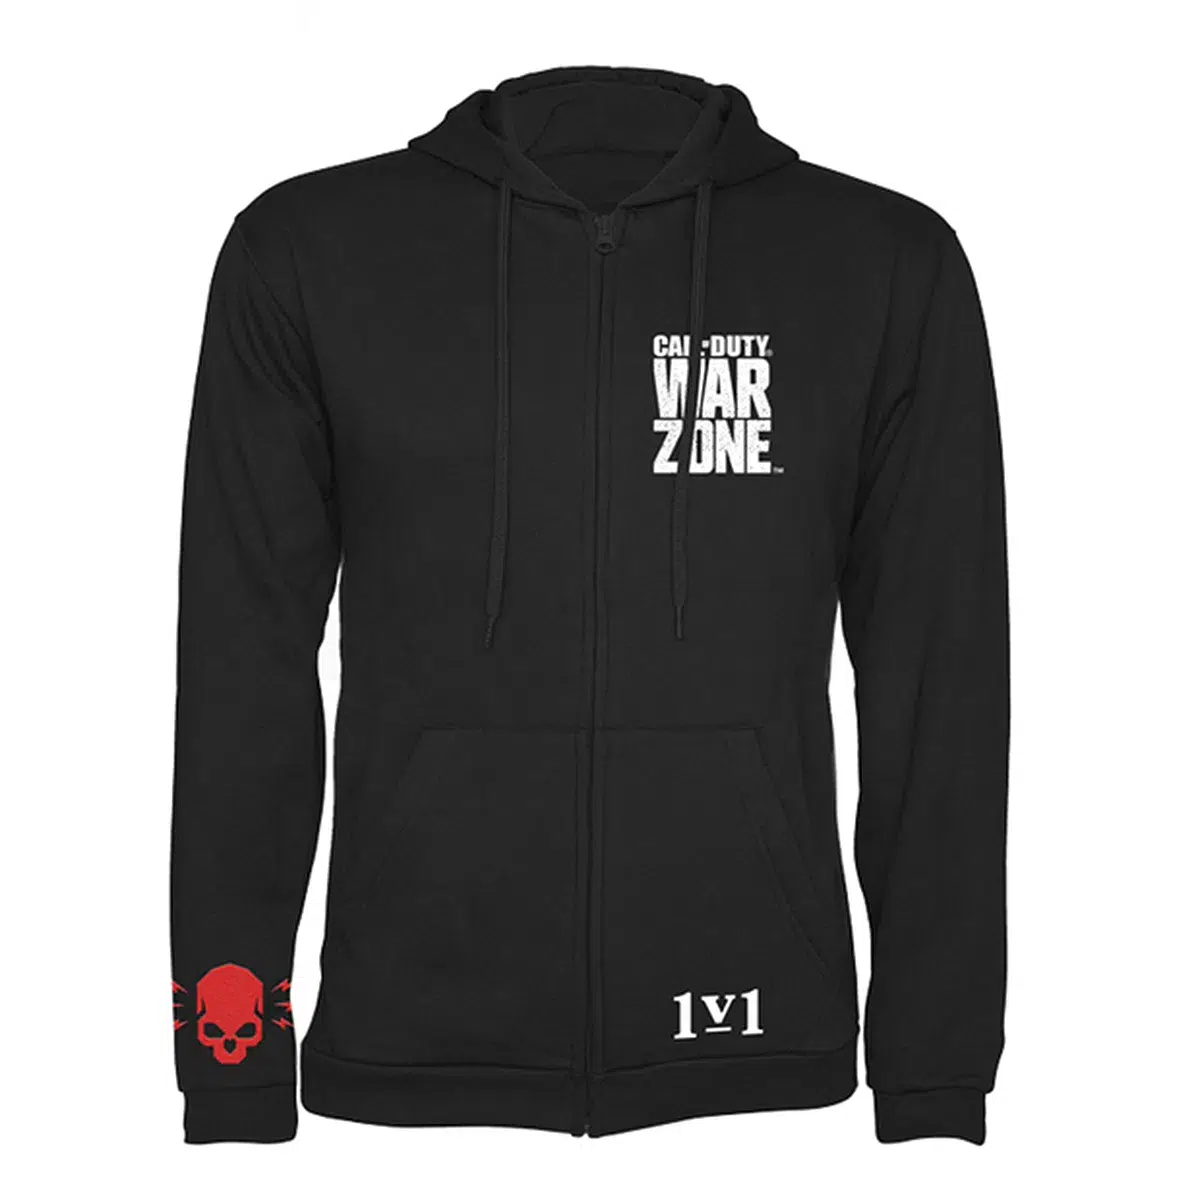 Call of Duty: Warzone Zipper Hoodie "Winner Takes All" Black S Cover